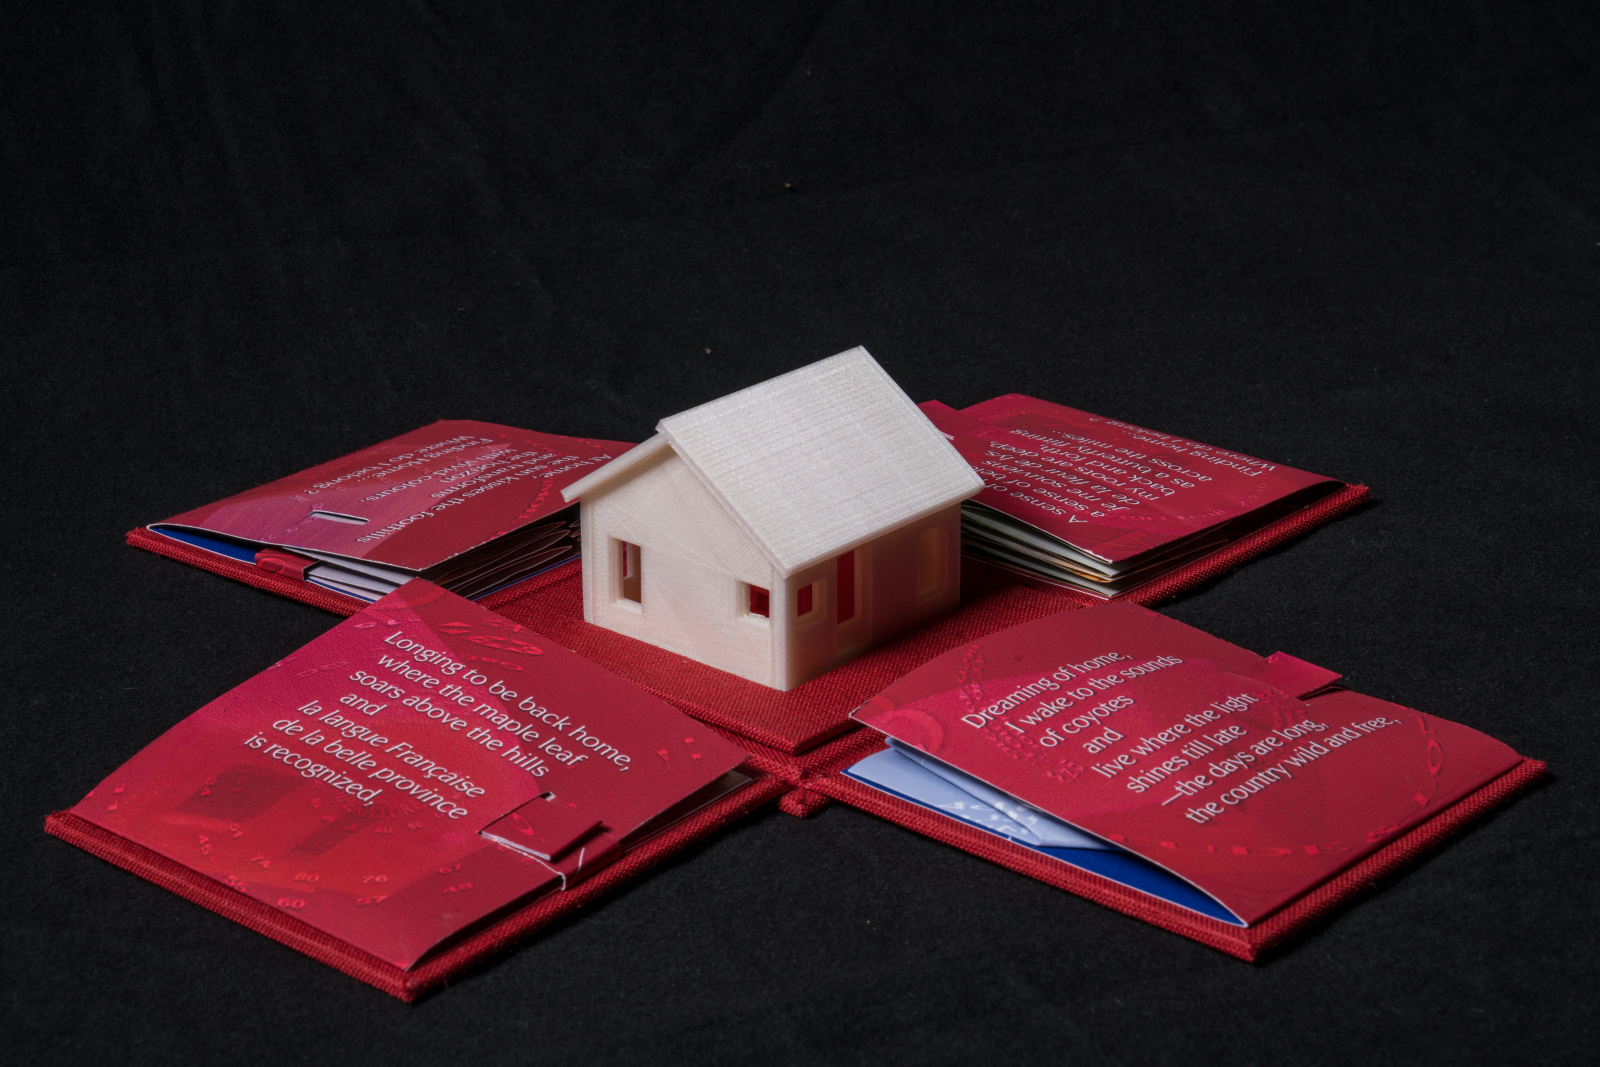 An image of Finding Home by Louise Levergneux against a black background. The book is opened, 4 red pages sitting in a square around a white, 3D printed house.